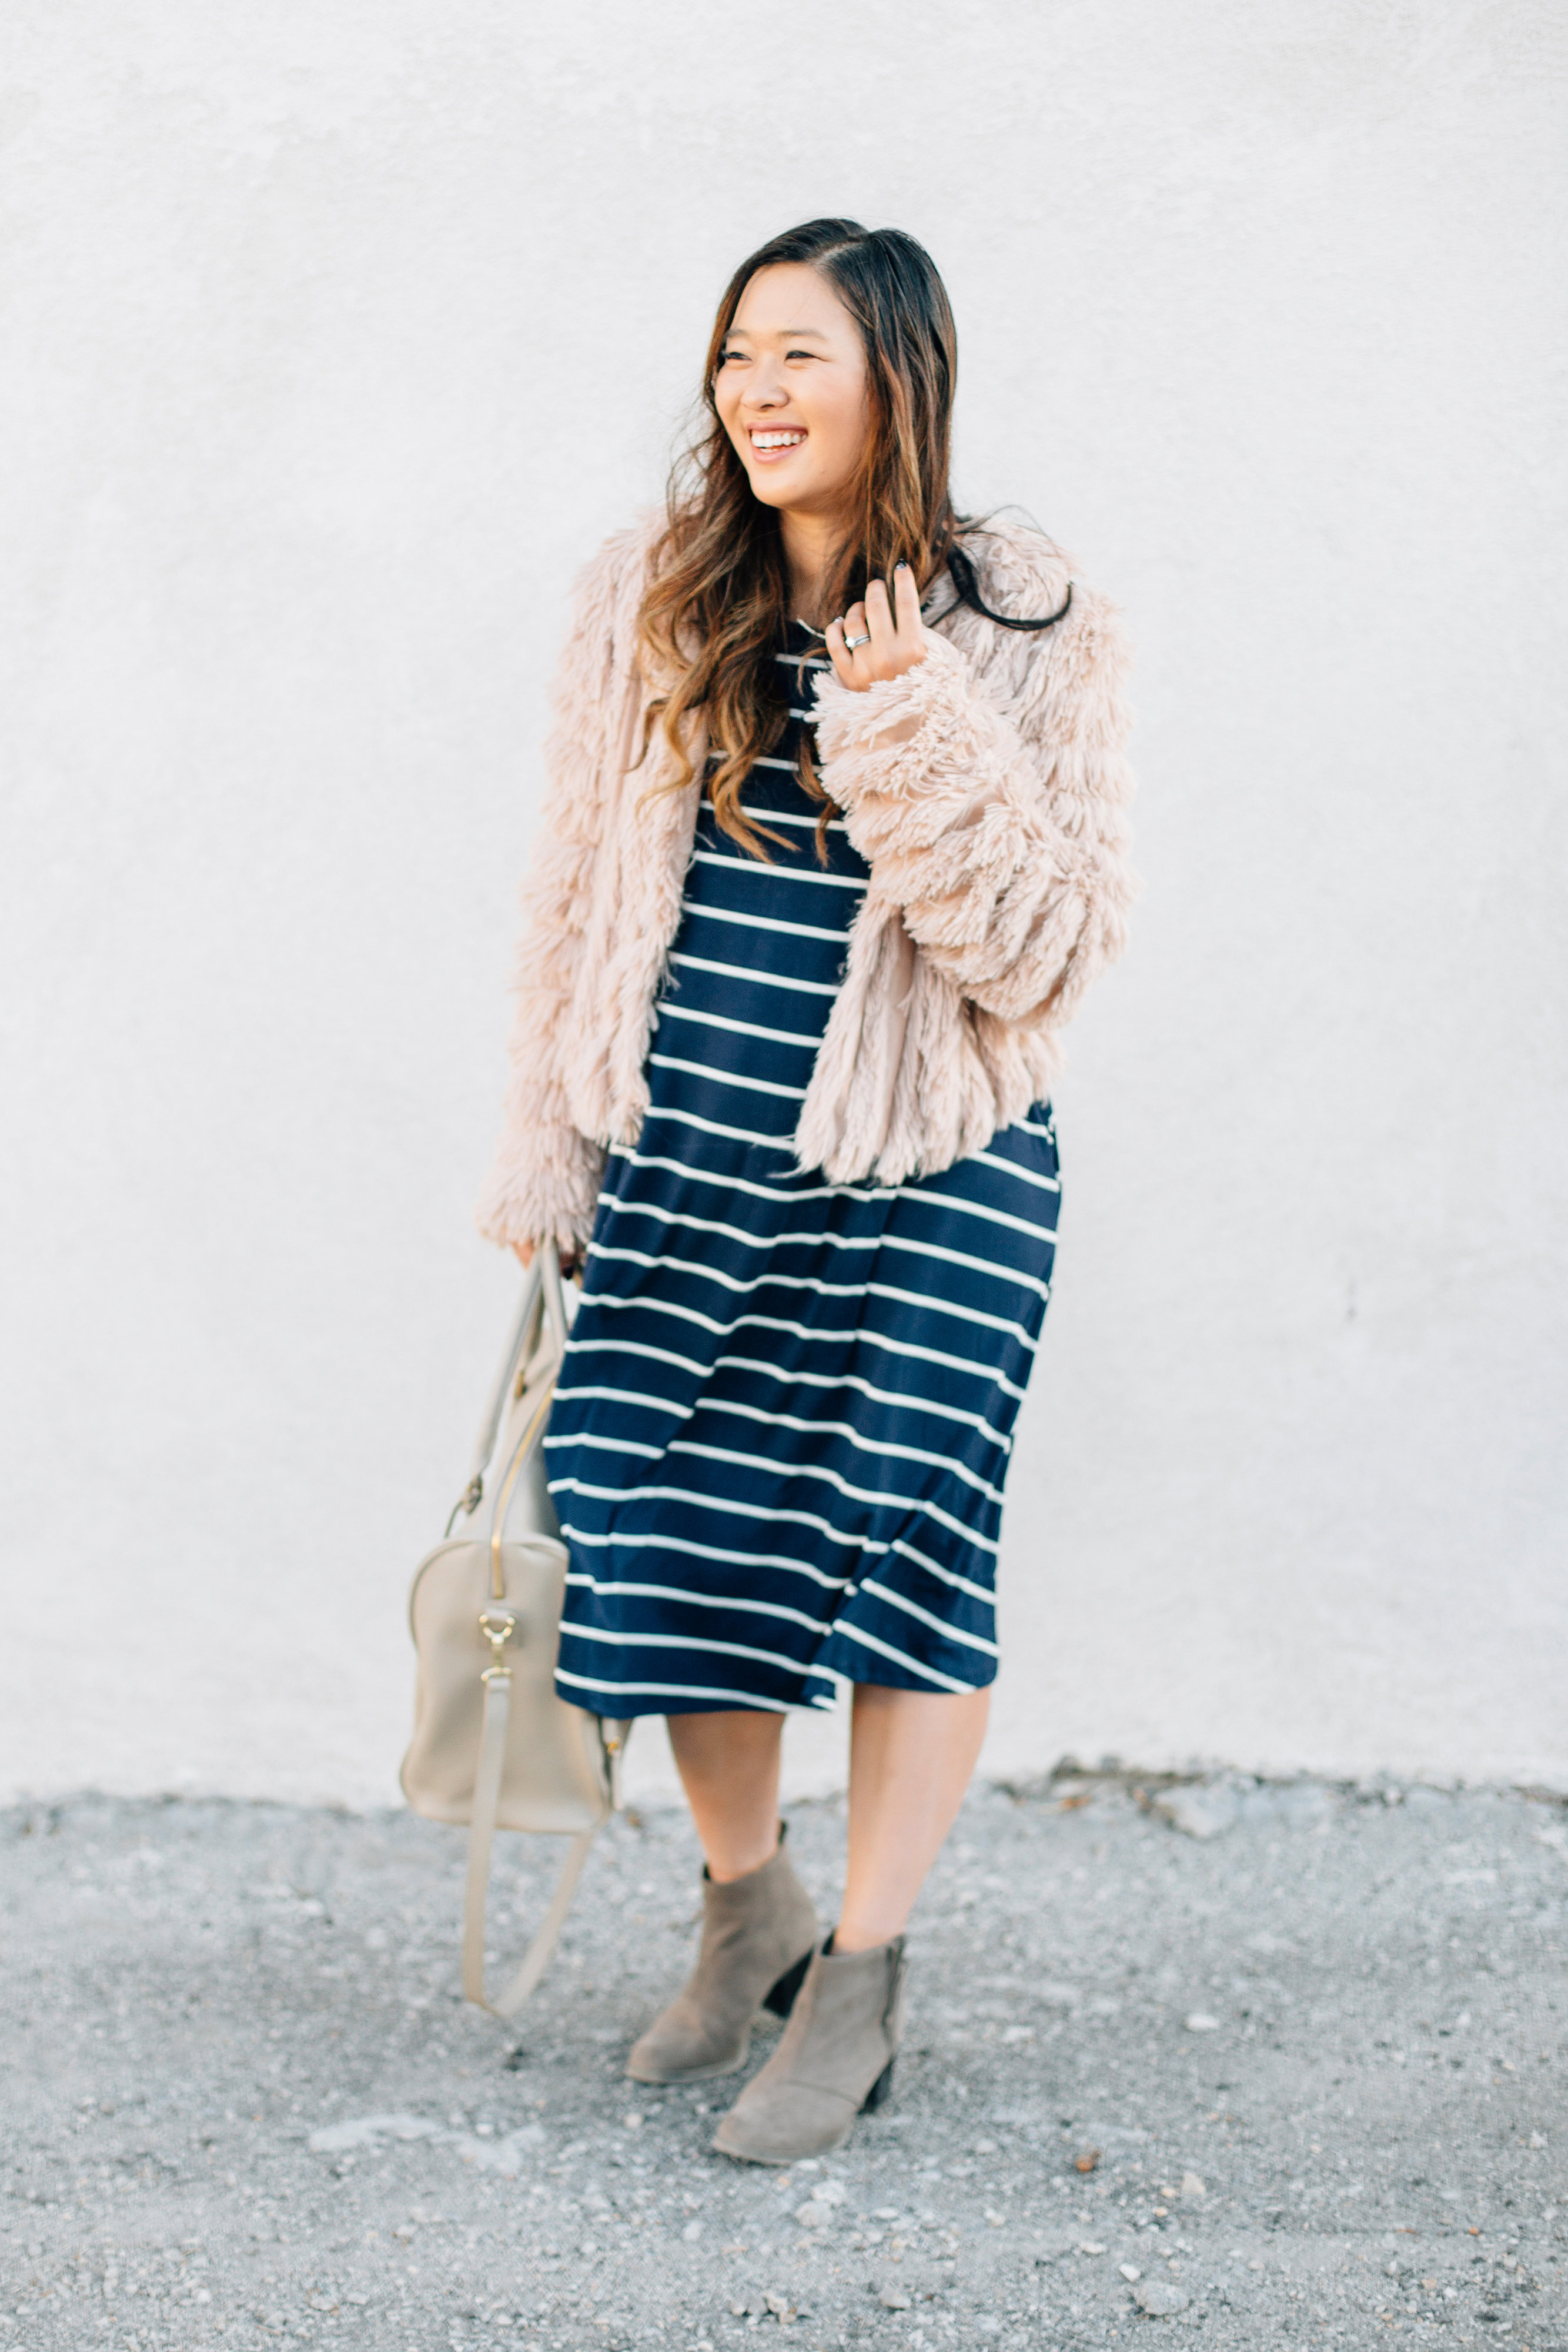 7 Of The Best Summer To Fall Fashion Outfits You Can Recreate by Utah fashion blogger Sandy A La Mode